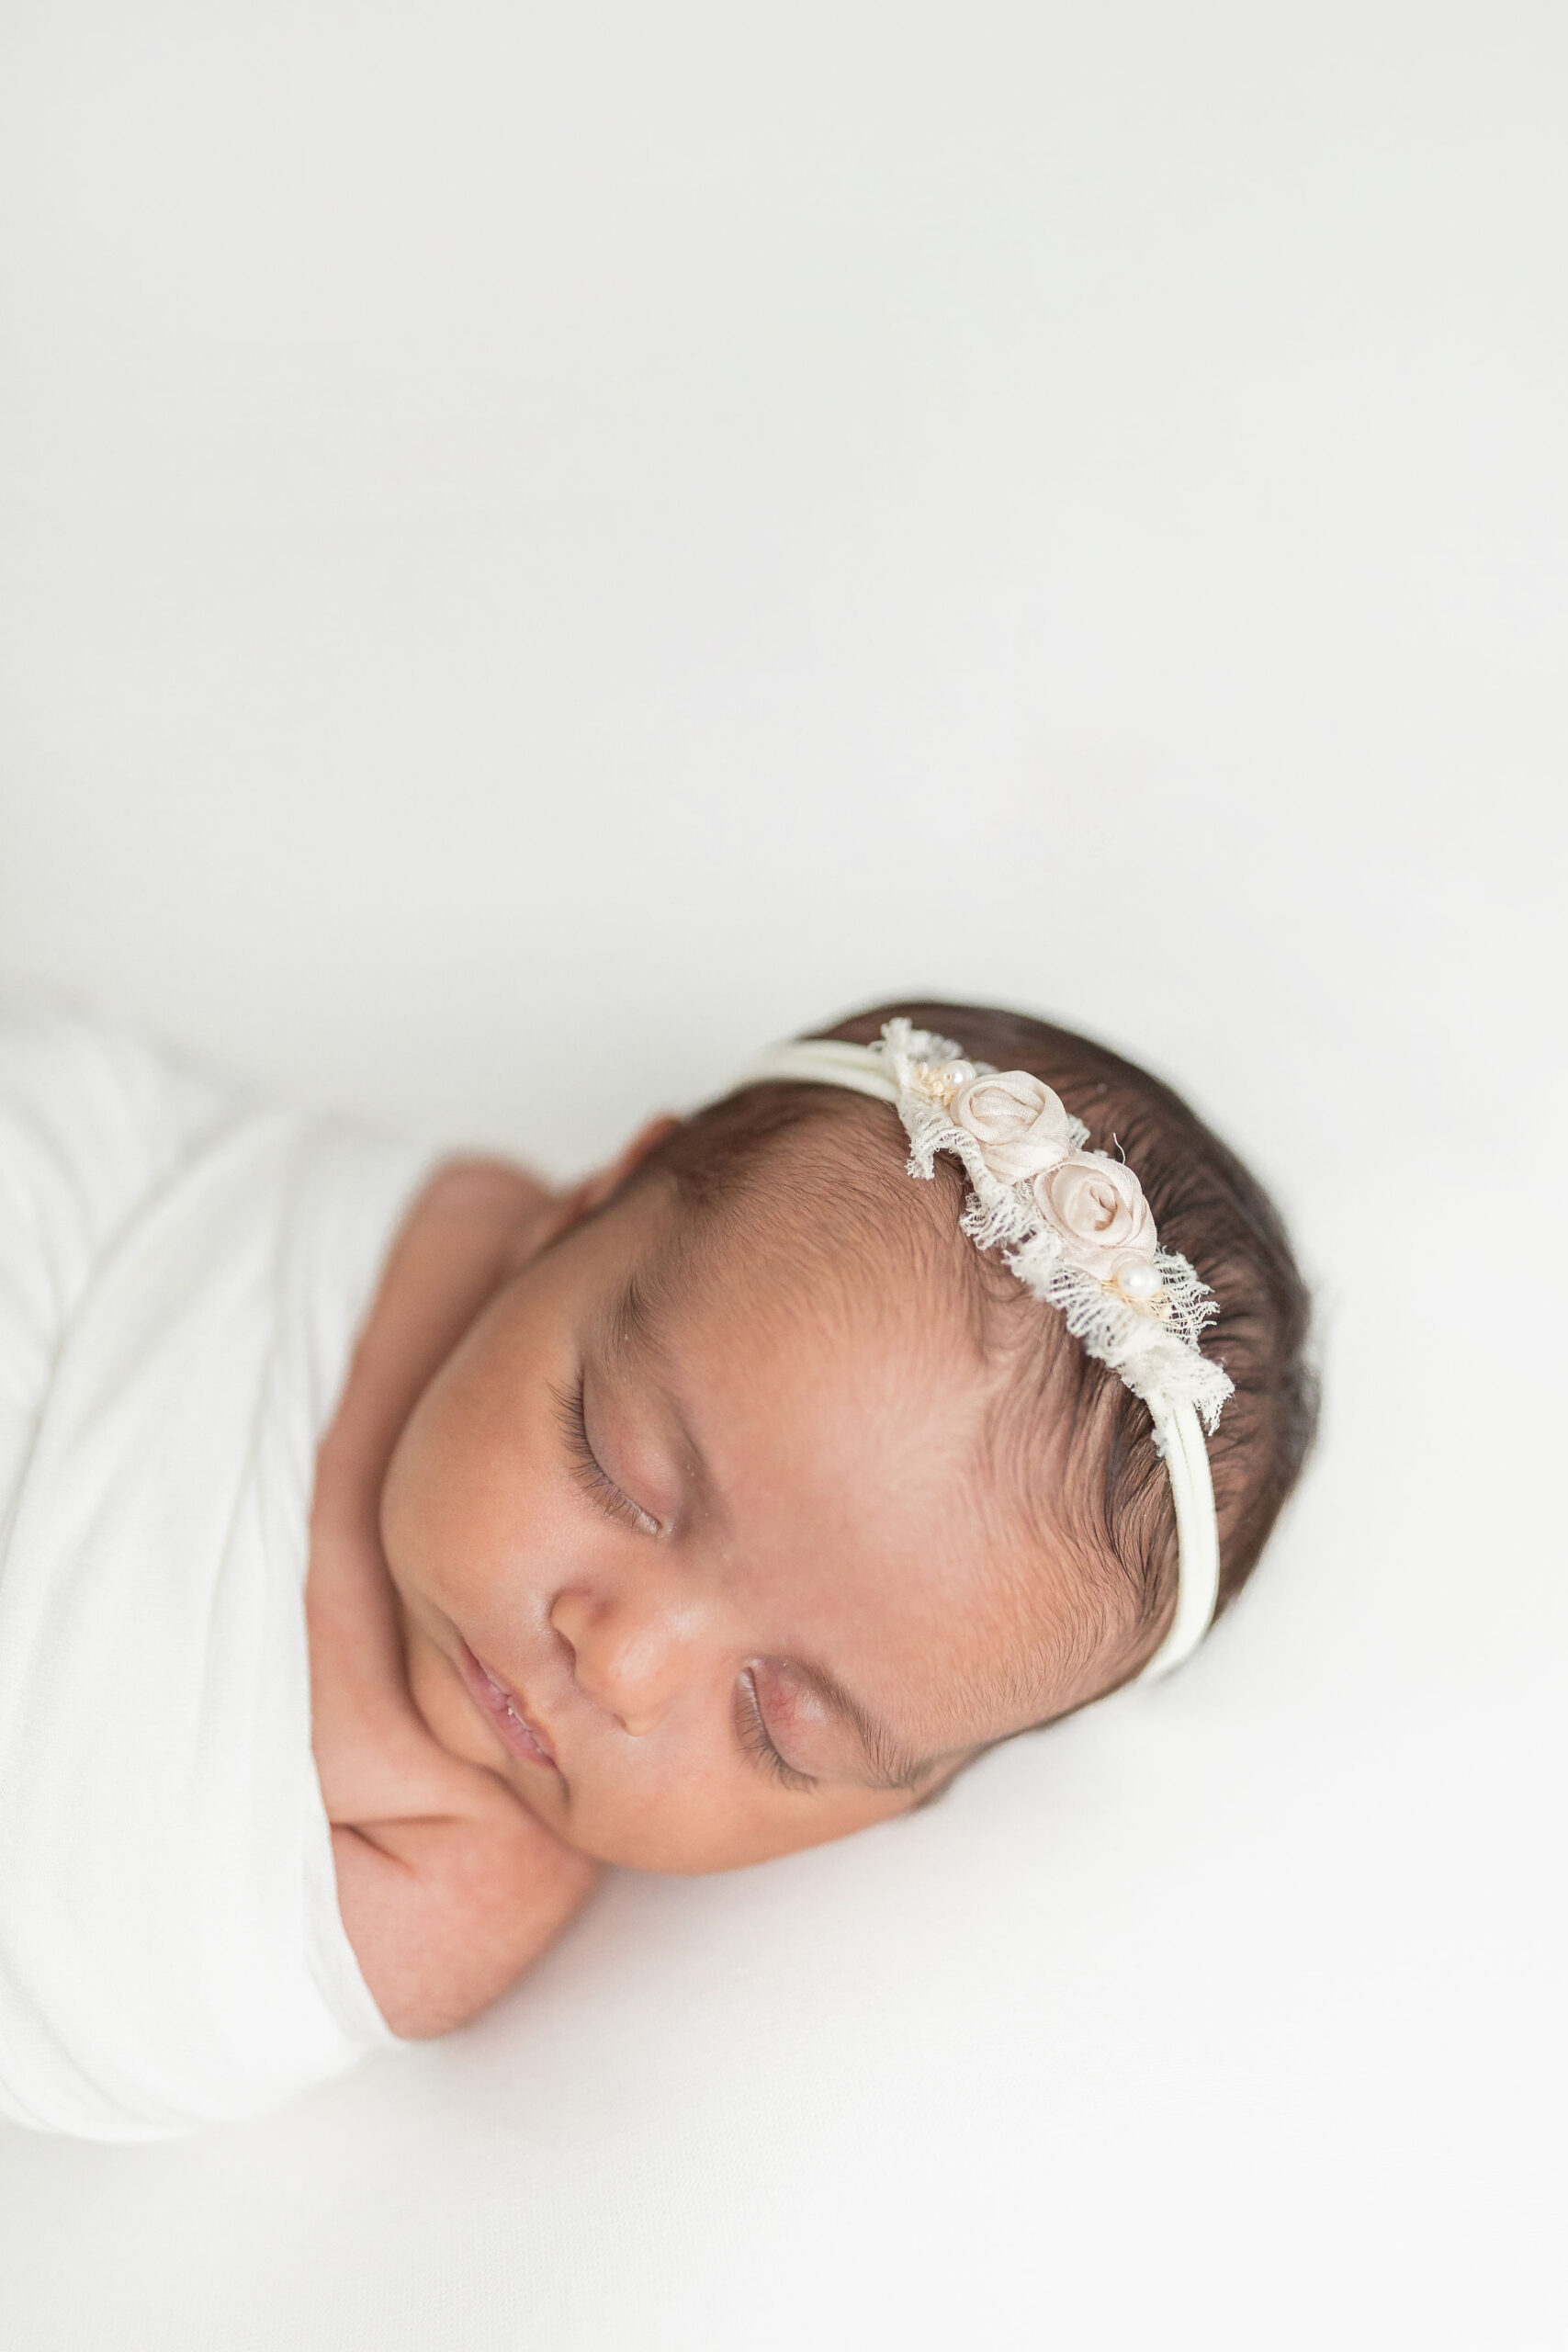 A newborn baby sleeps while wrapped in a swaddle wearing a fabric flower headband namely newborns